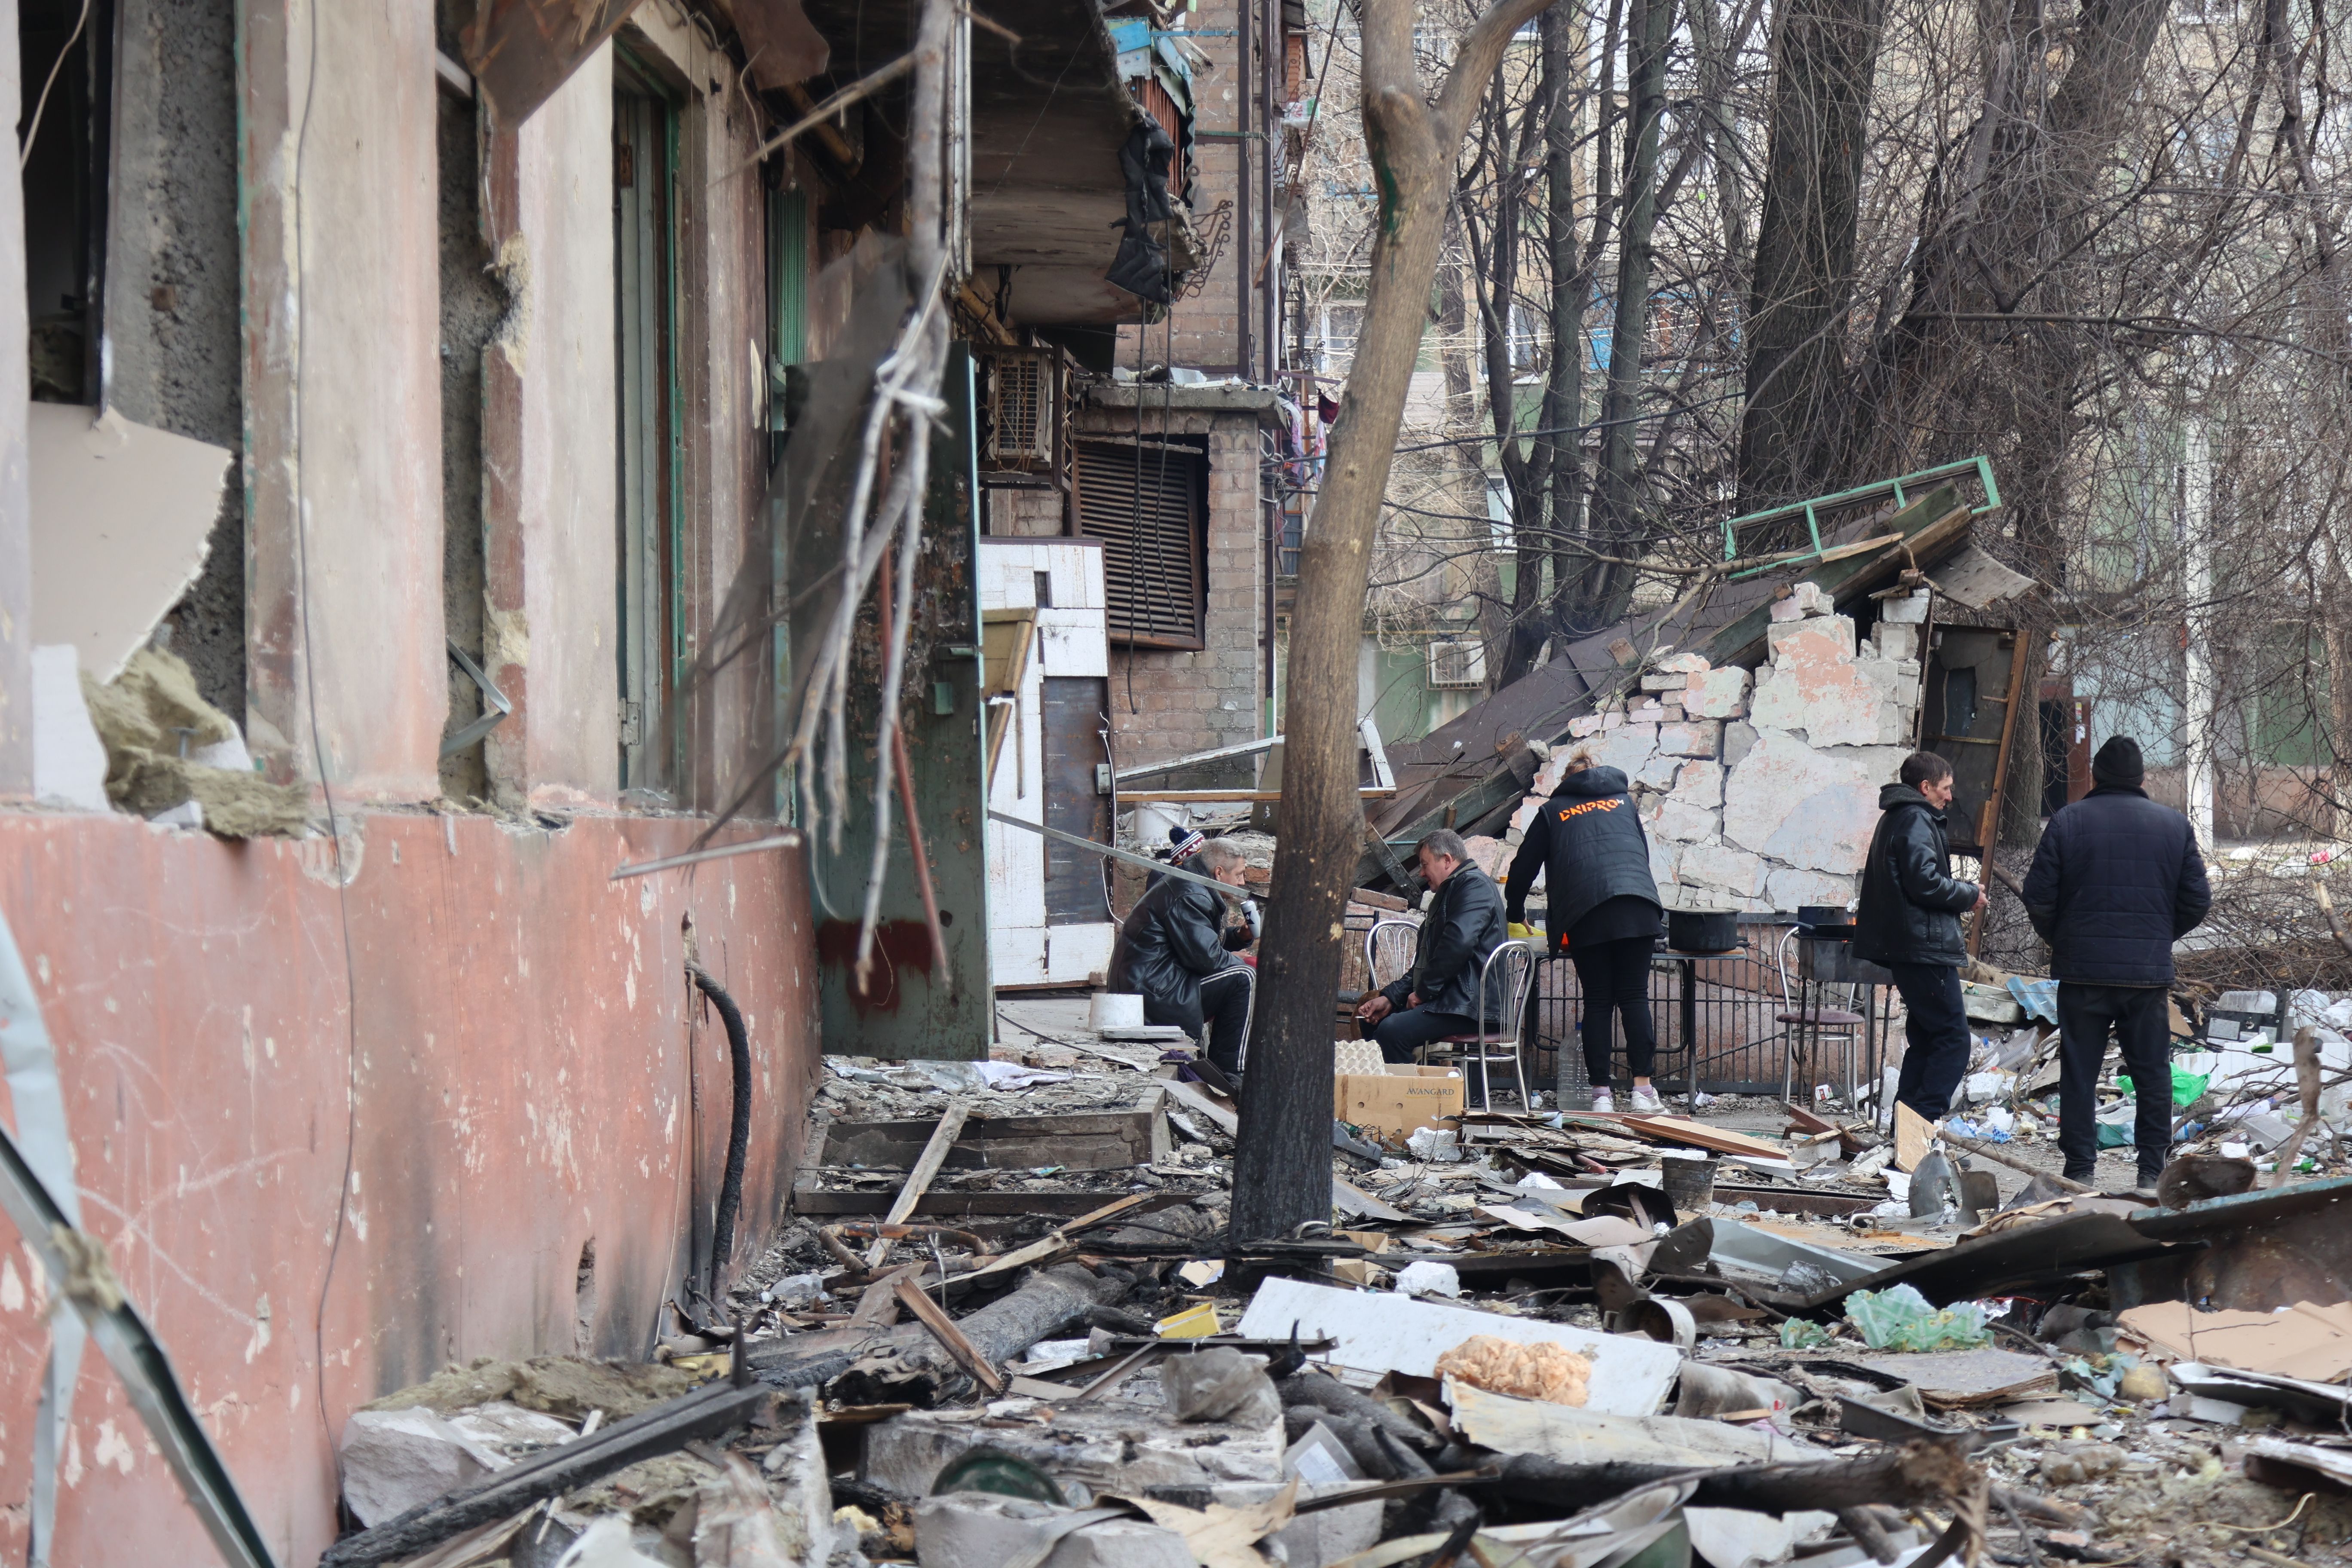     A view of damaged buildings and vehicles after the bombing of the Ukrainian city of Mariupol, which is under the control of the Russian army and pro-Russian separatists, on March 29.